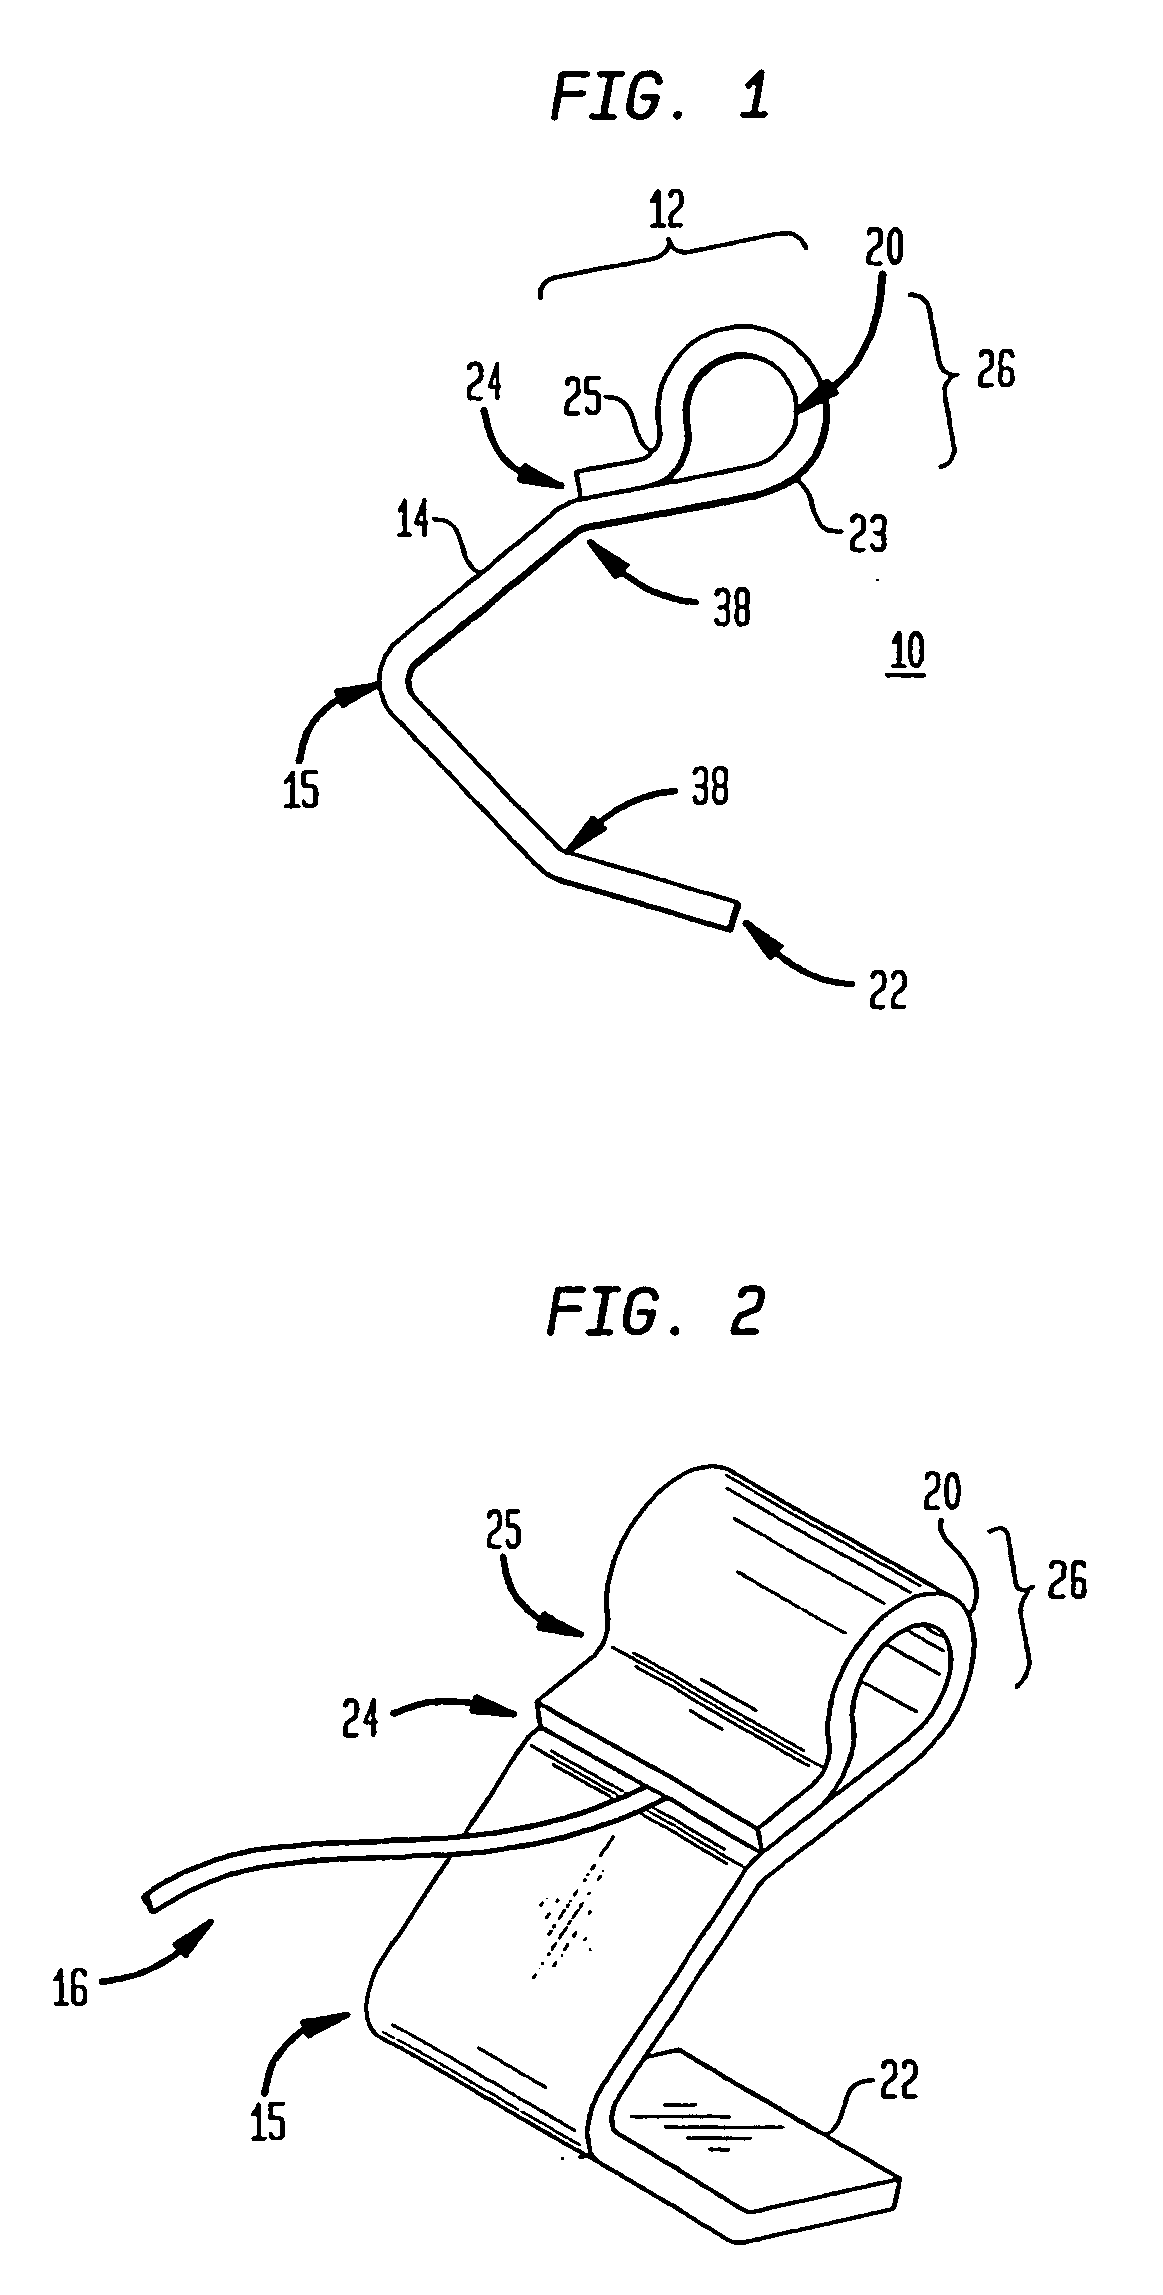 Clip and method for epicardial placement of temporary heart pacing electrodes